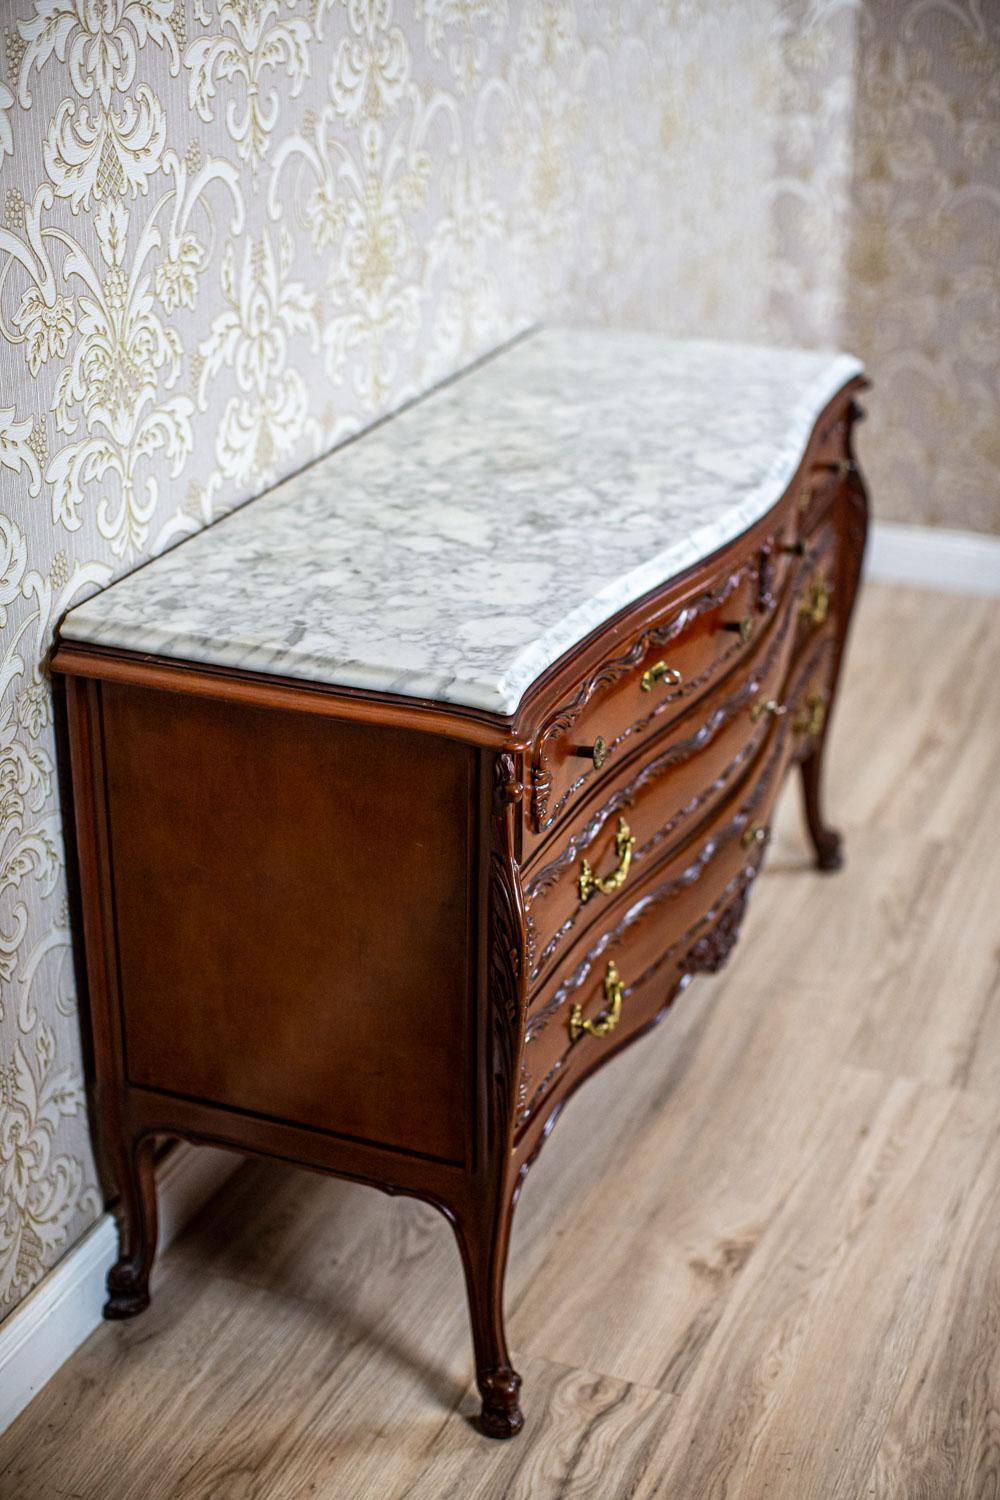 Decorative Beech Dresser From the Mid. 20th Century with Marble Top 1